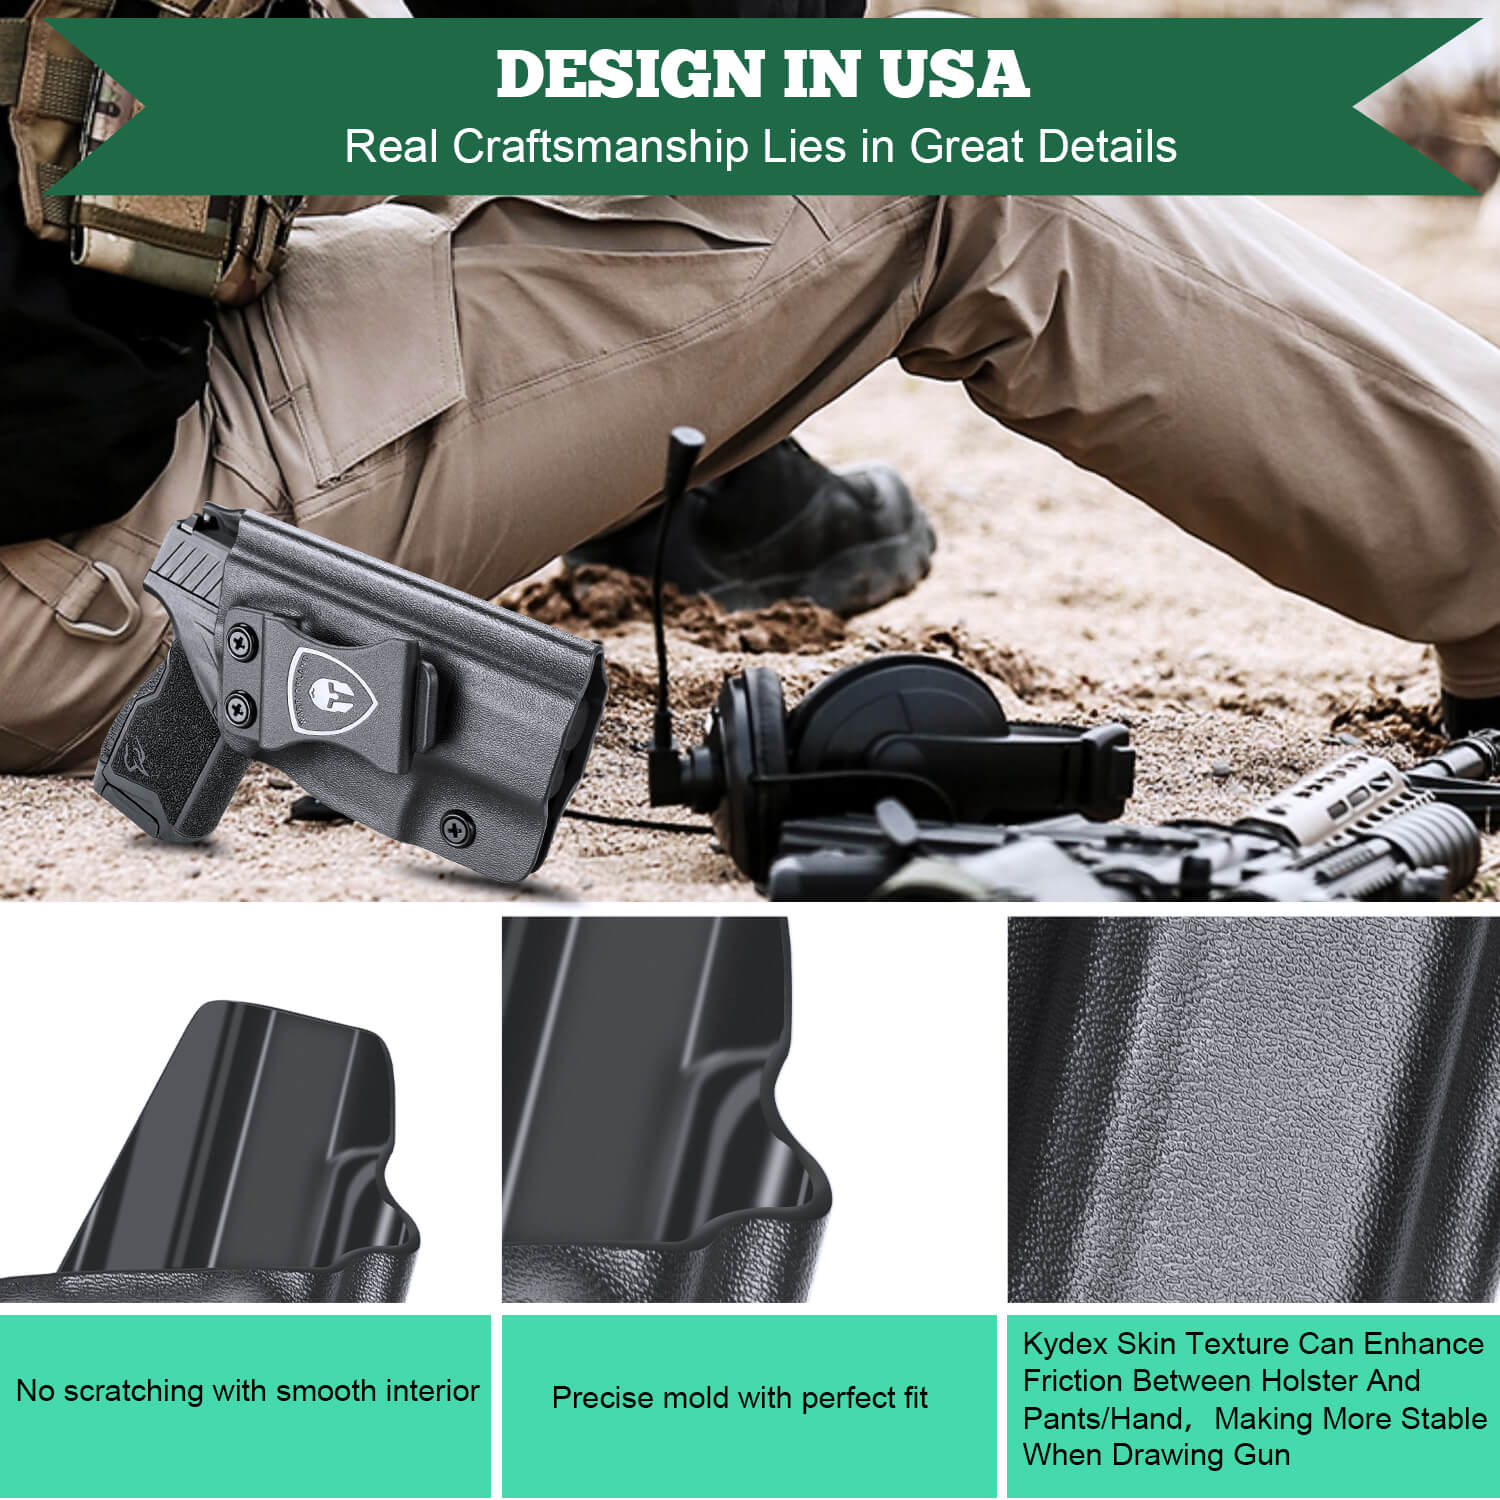 Taurus GX4 IWB Kydex Holster Concealed Carry Right/ Left Handed | WARRIORLAND